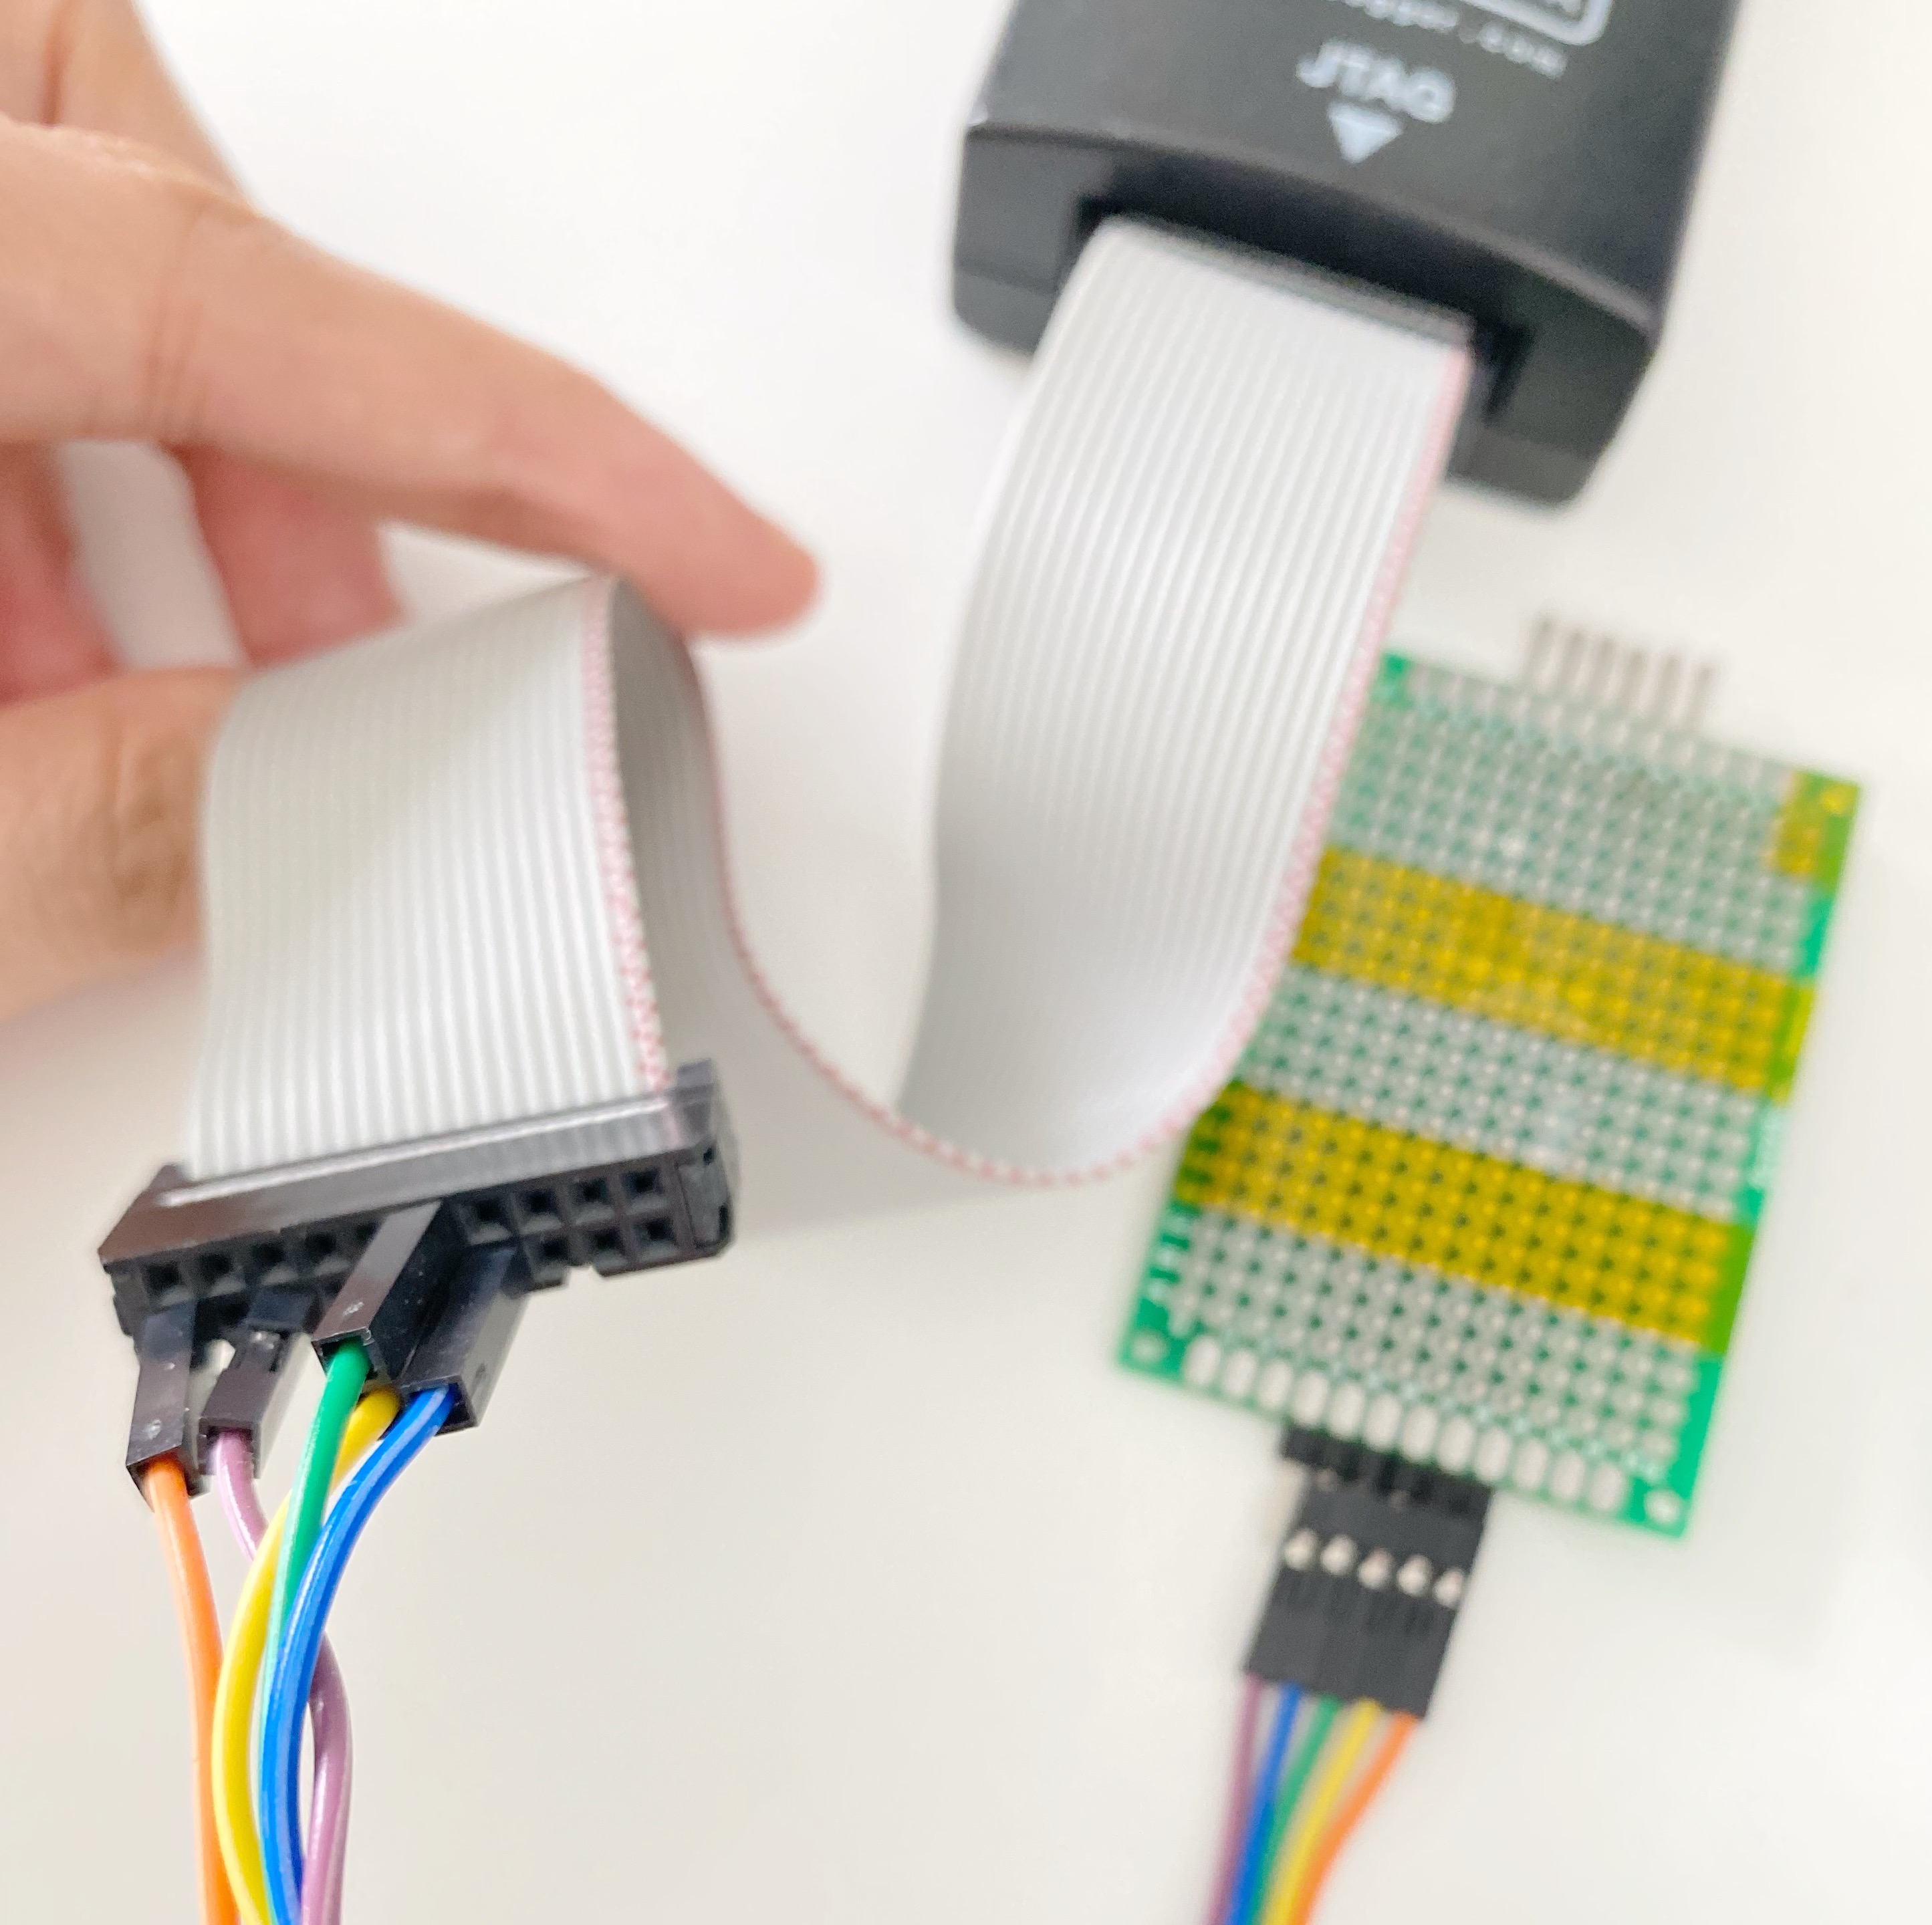 Connecting the J-Link SEGGER via the ribbon cable to the pogo pins